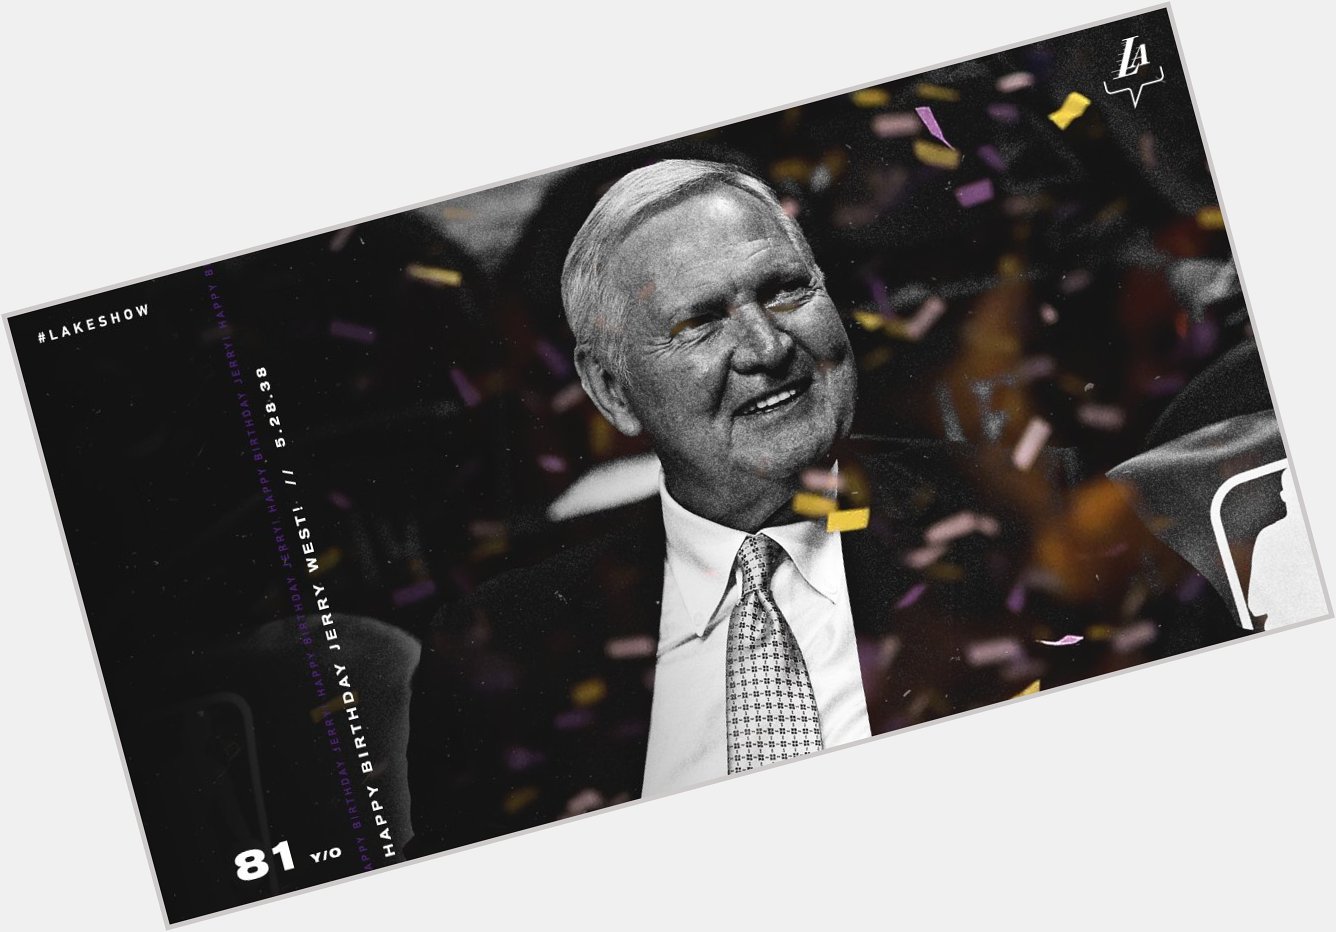 Mr. Clutch. The Logo. 

Happy birthday to the great Jerry West! 